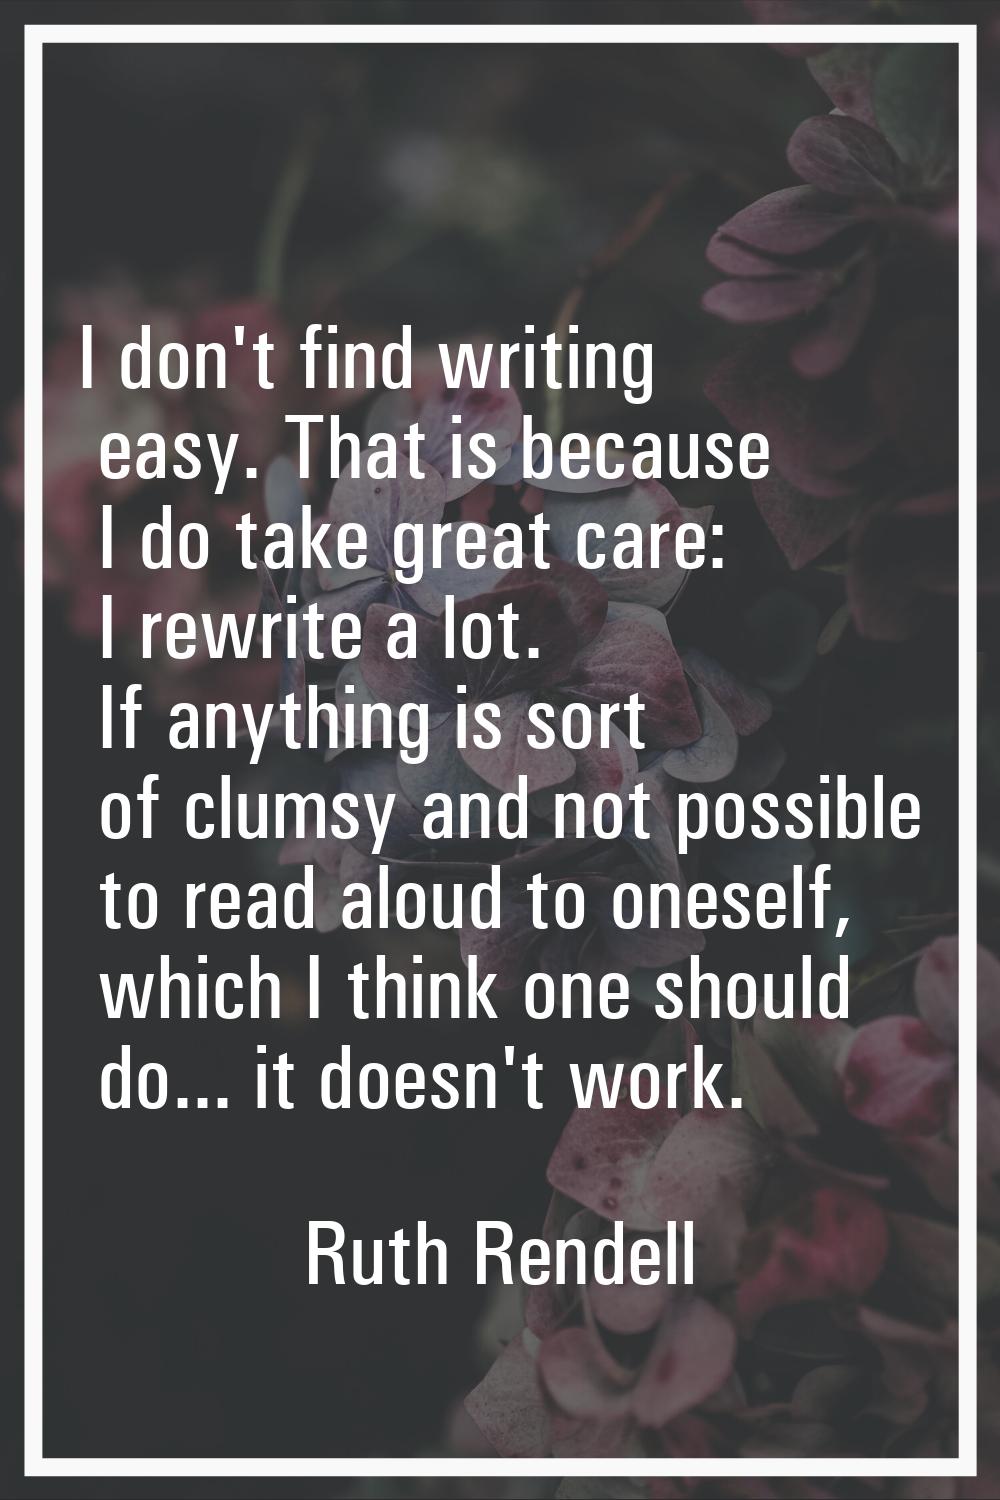 I don't find writing easy. That is because I do take great care: I rewrite a lot. If anything is so